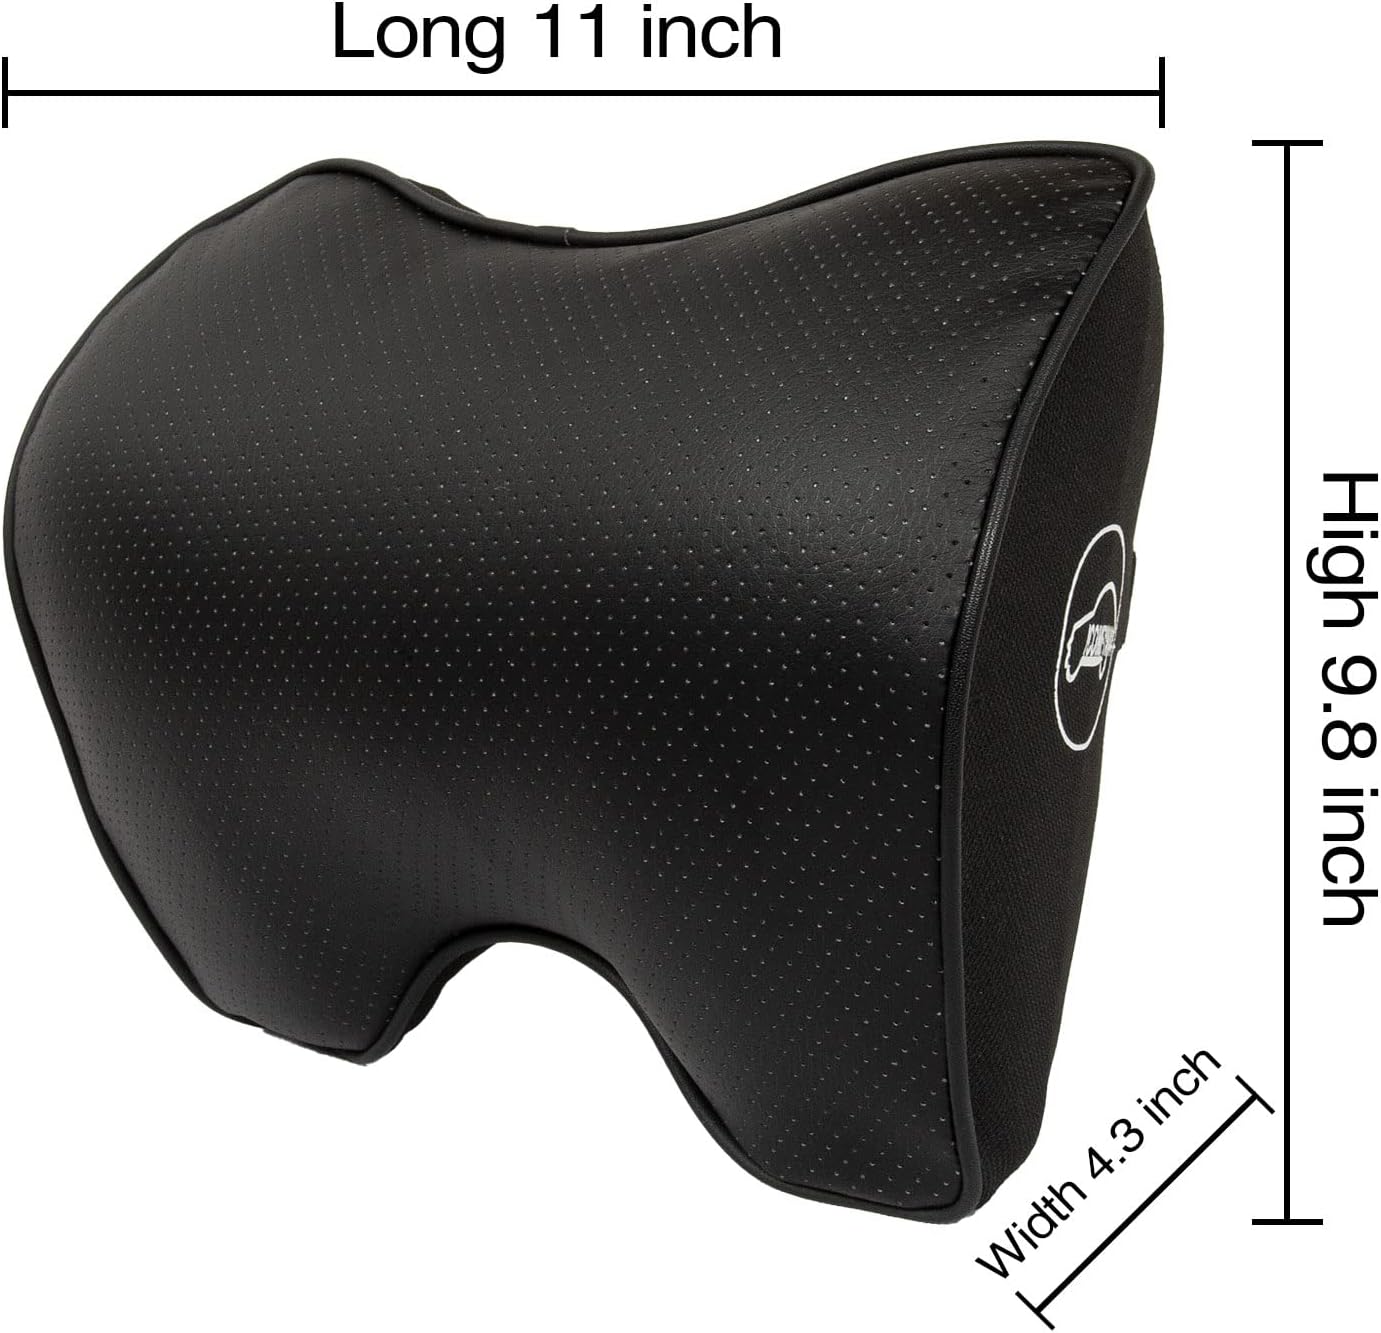 Icomfyway Car Neck Support Pillow for Neck Pain Relief When Driving,Headrest Pillow for Car Seat with Soft Memory Foam – Black